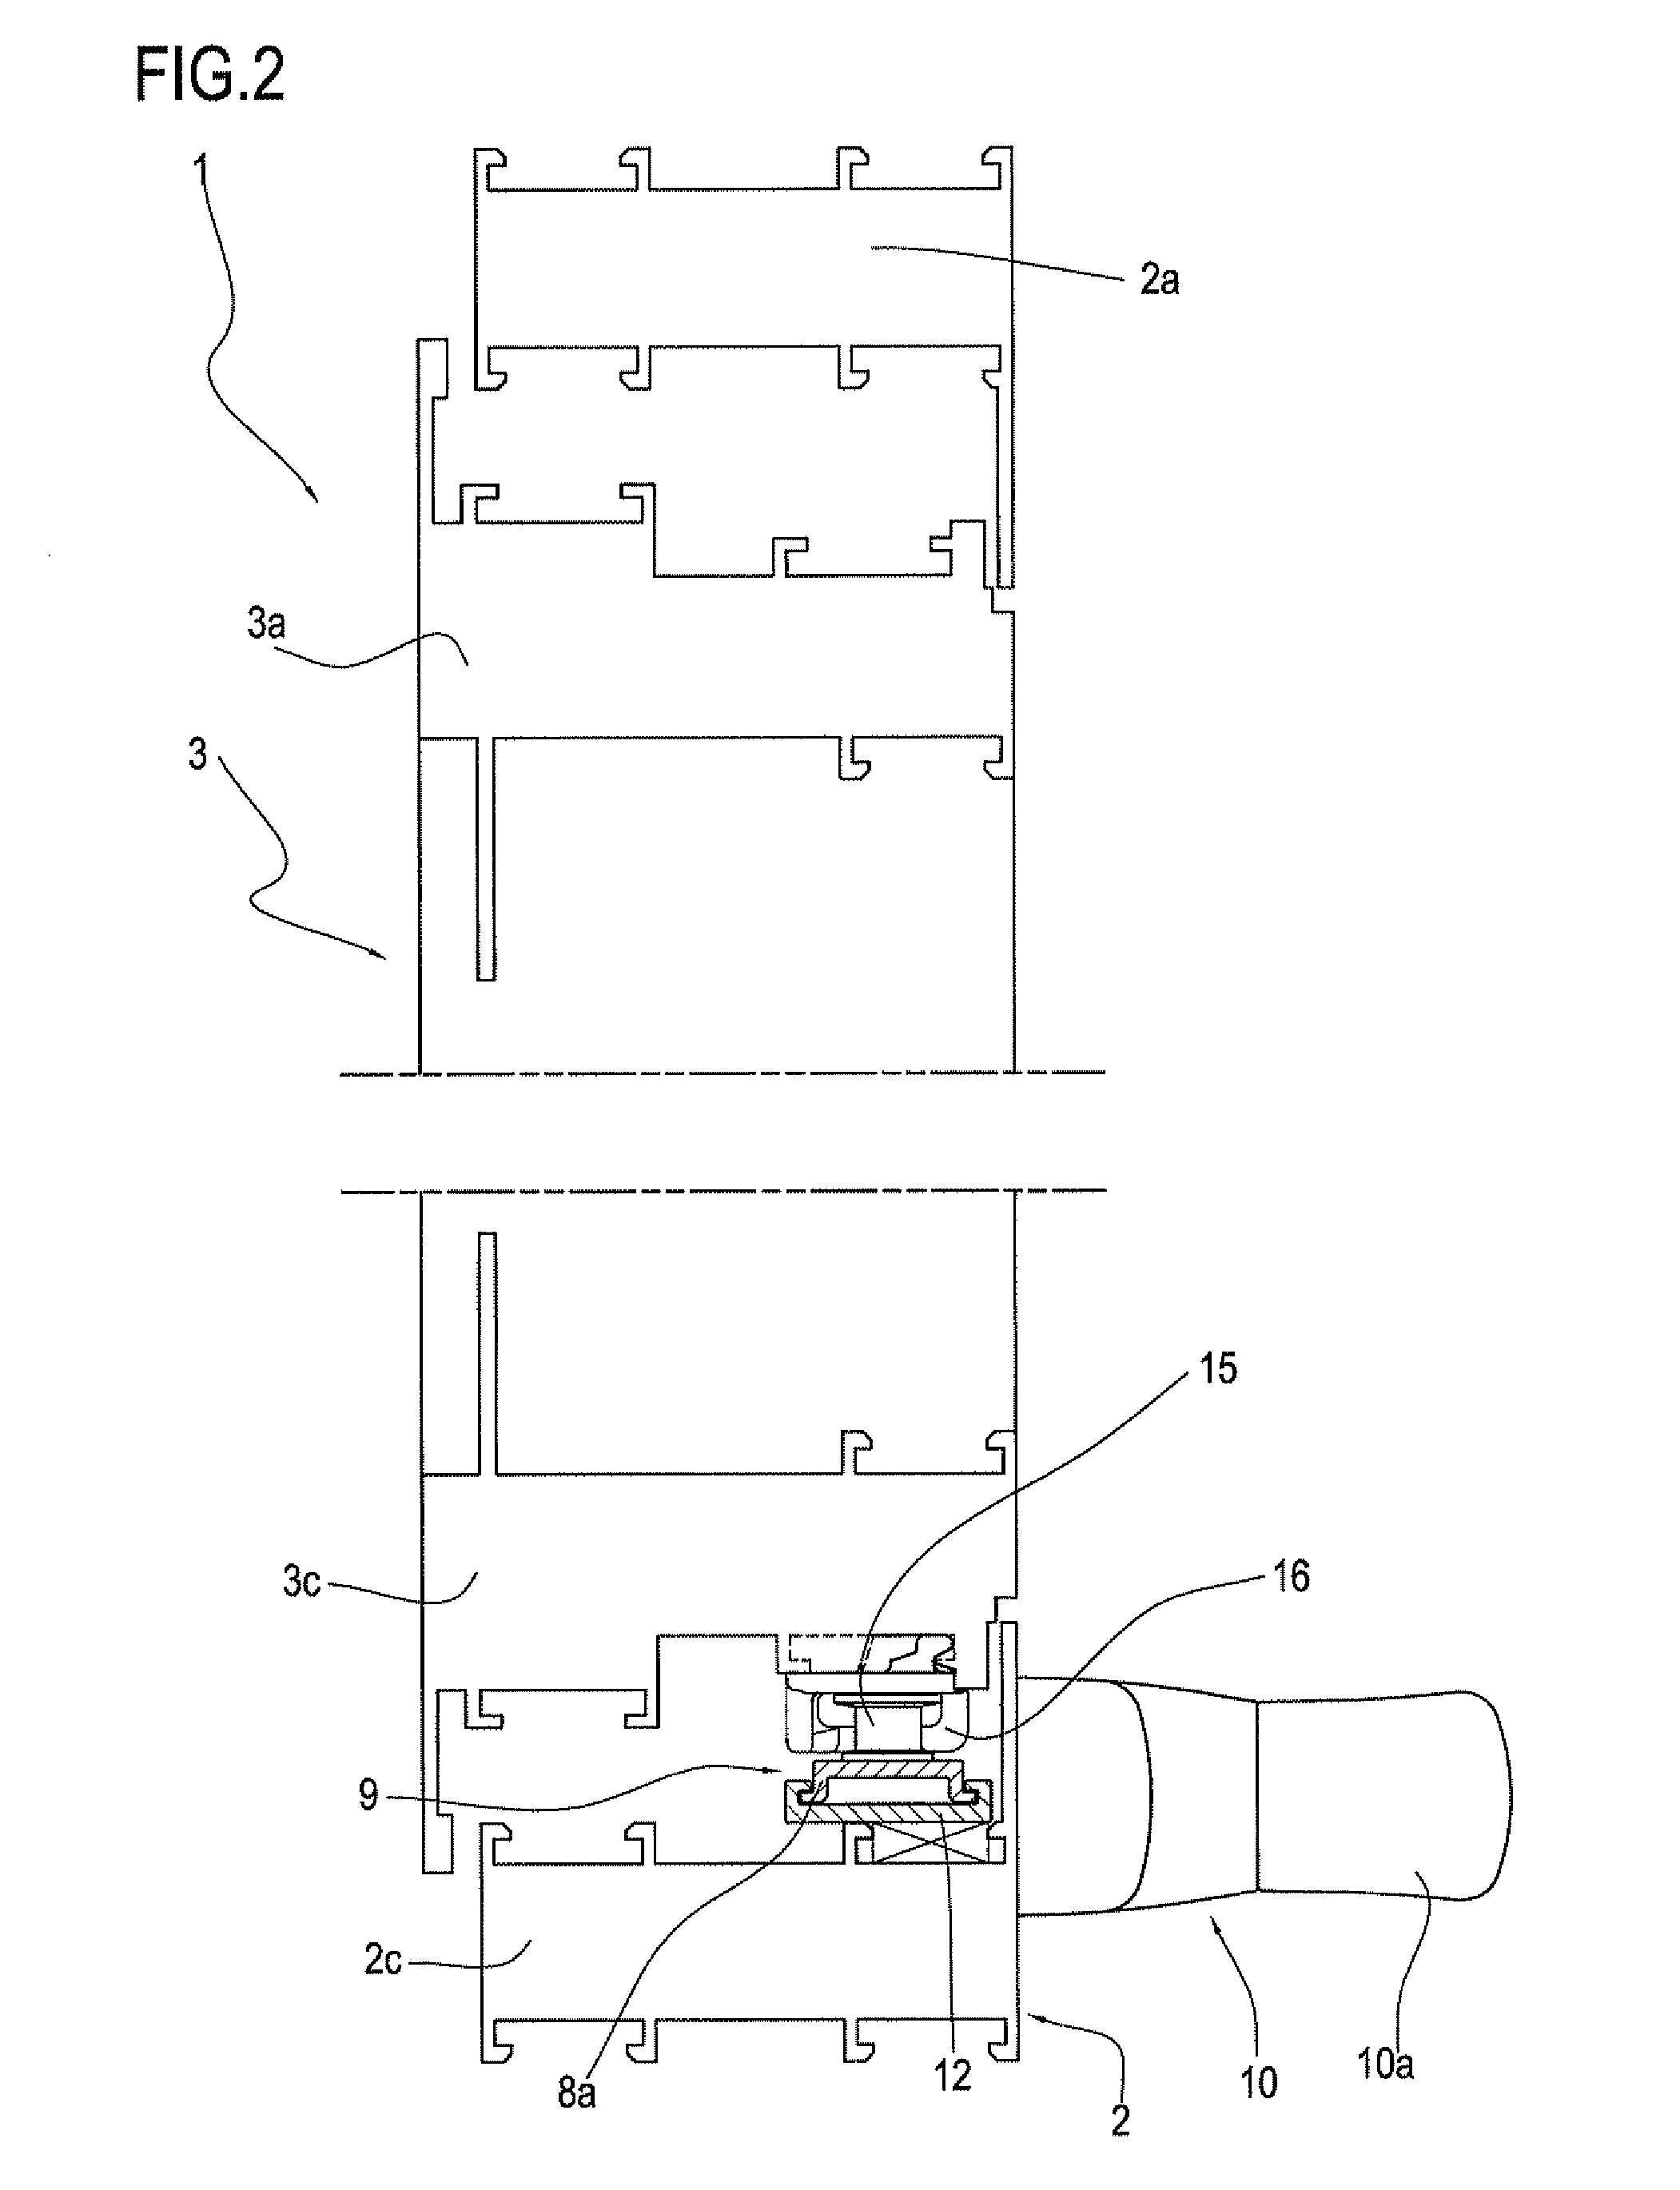 Awning window unit with an operating and closing slide unit for the movable frame of the window unit